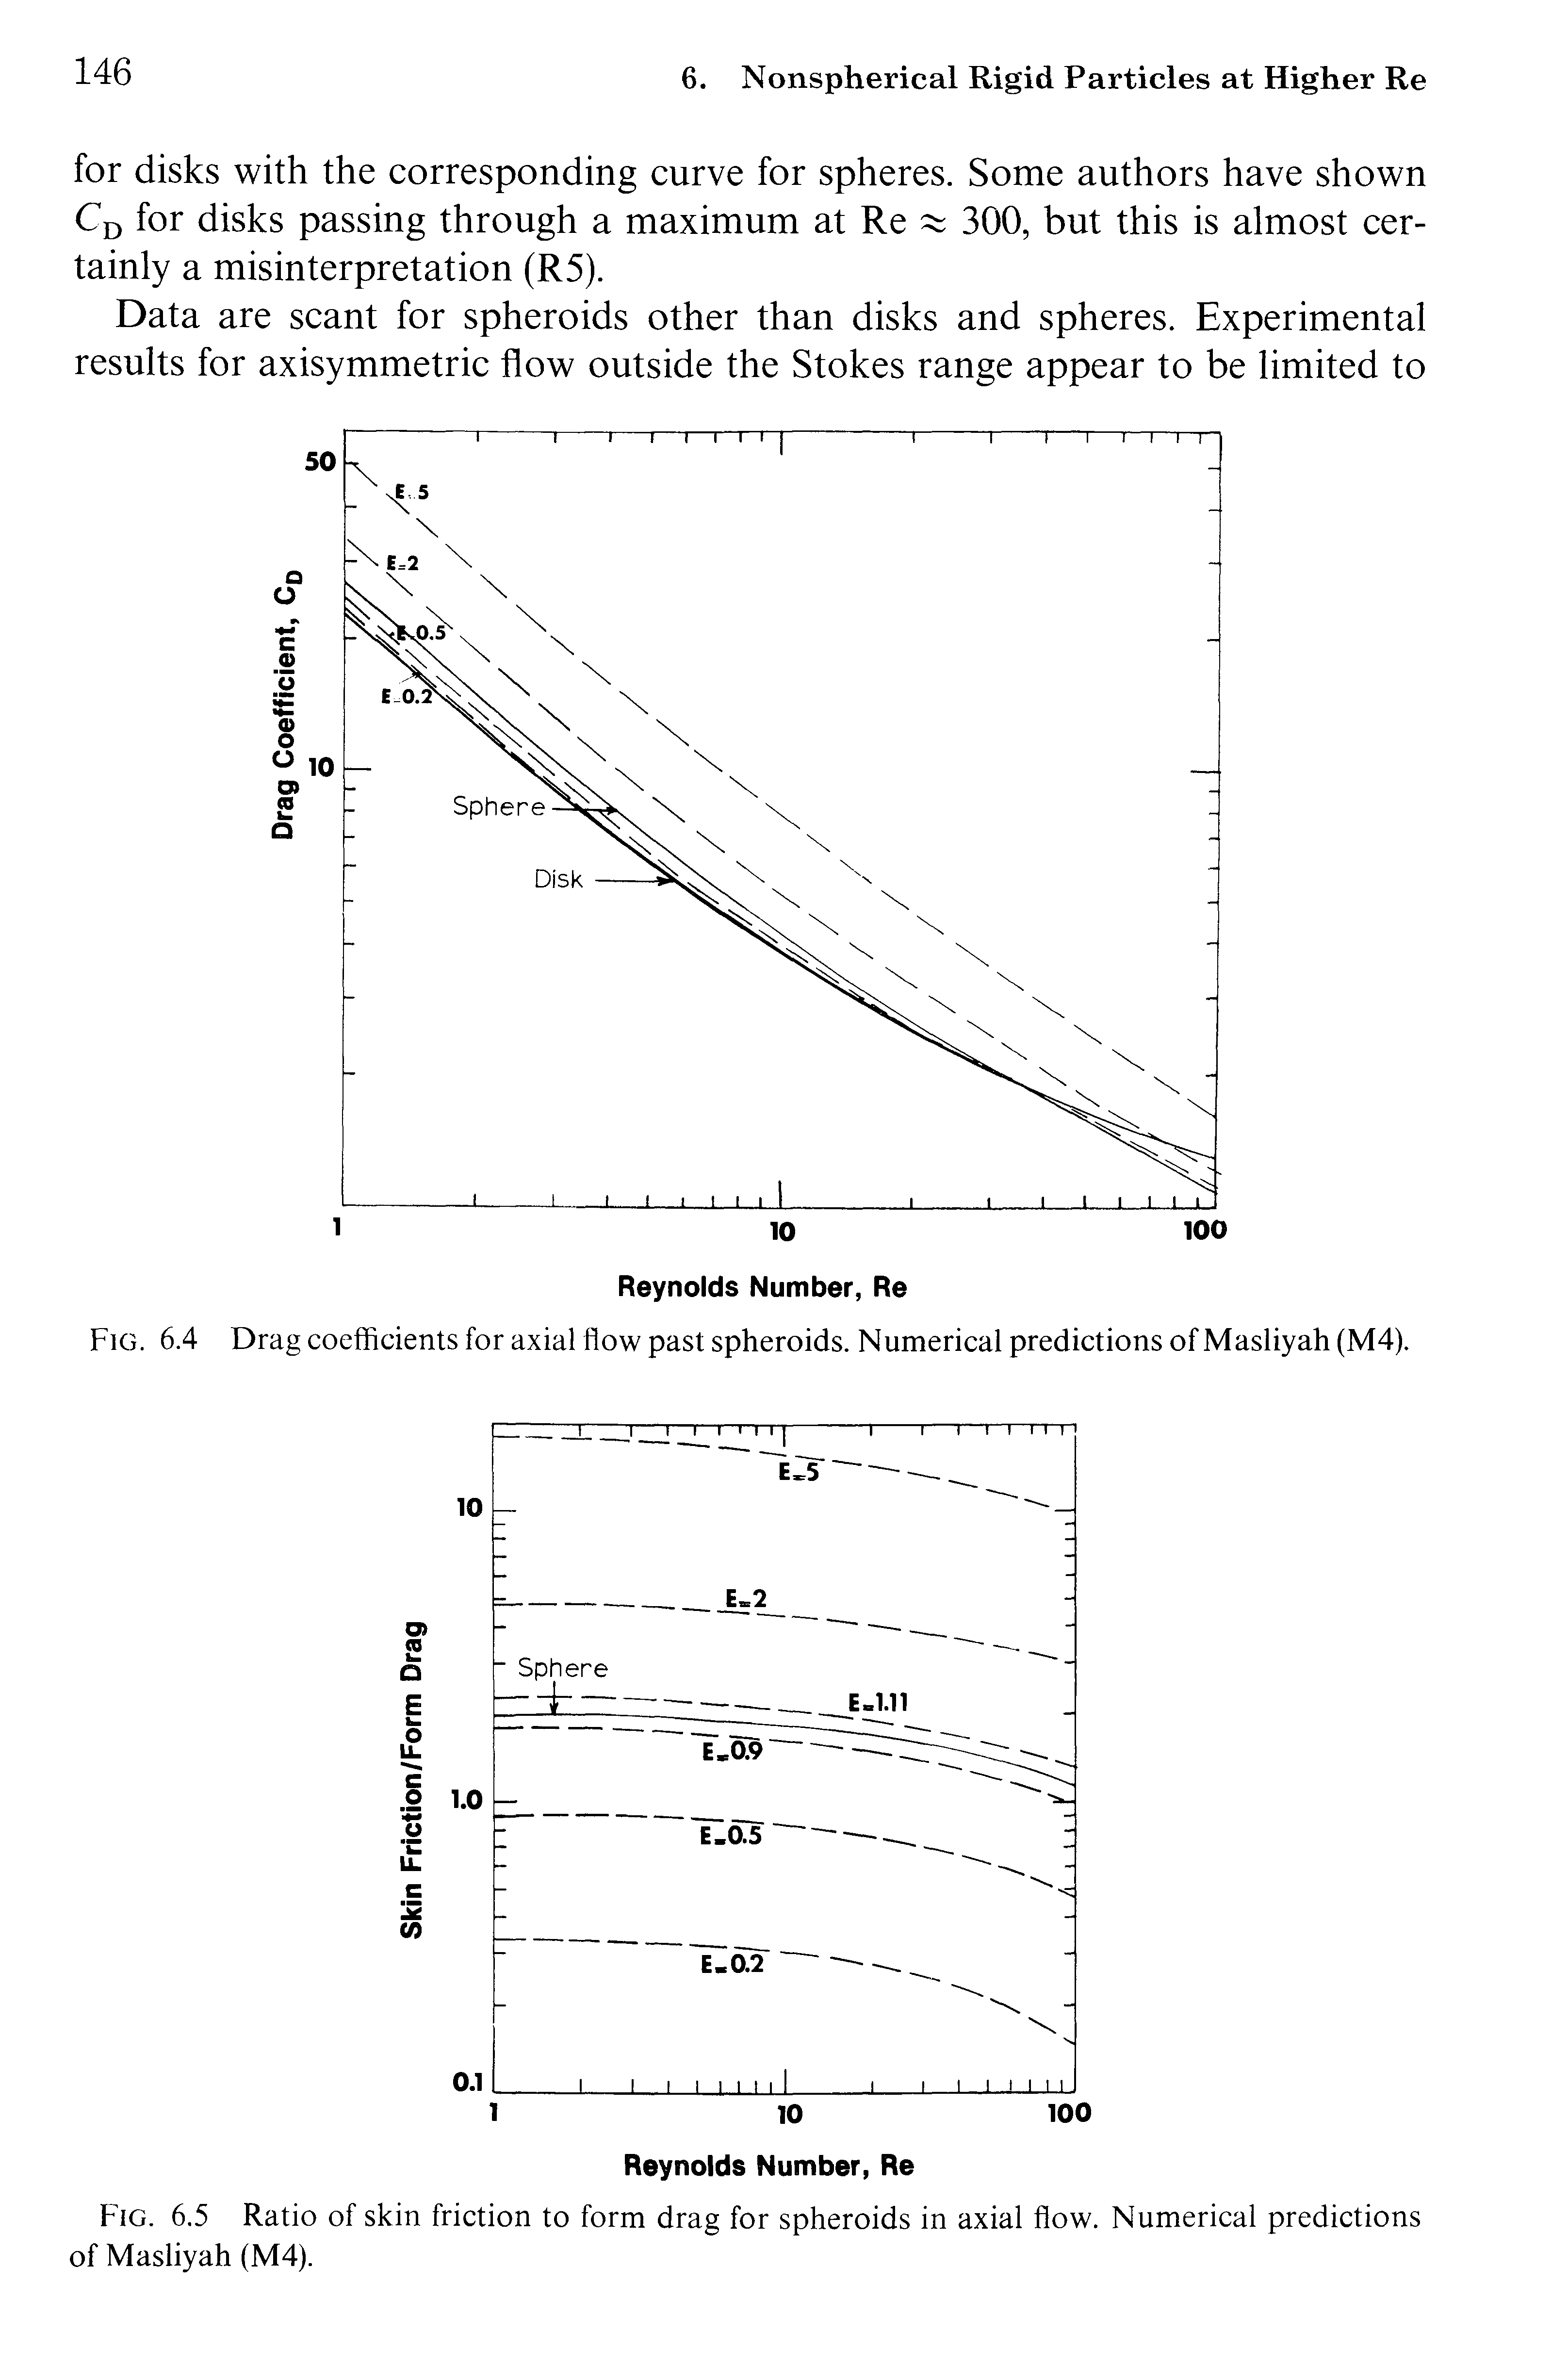 Fig. 6.4 Drag coefficients for axial flow past spheroids. Numerical predictions of Masliyah (M4).